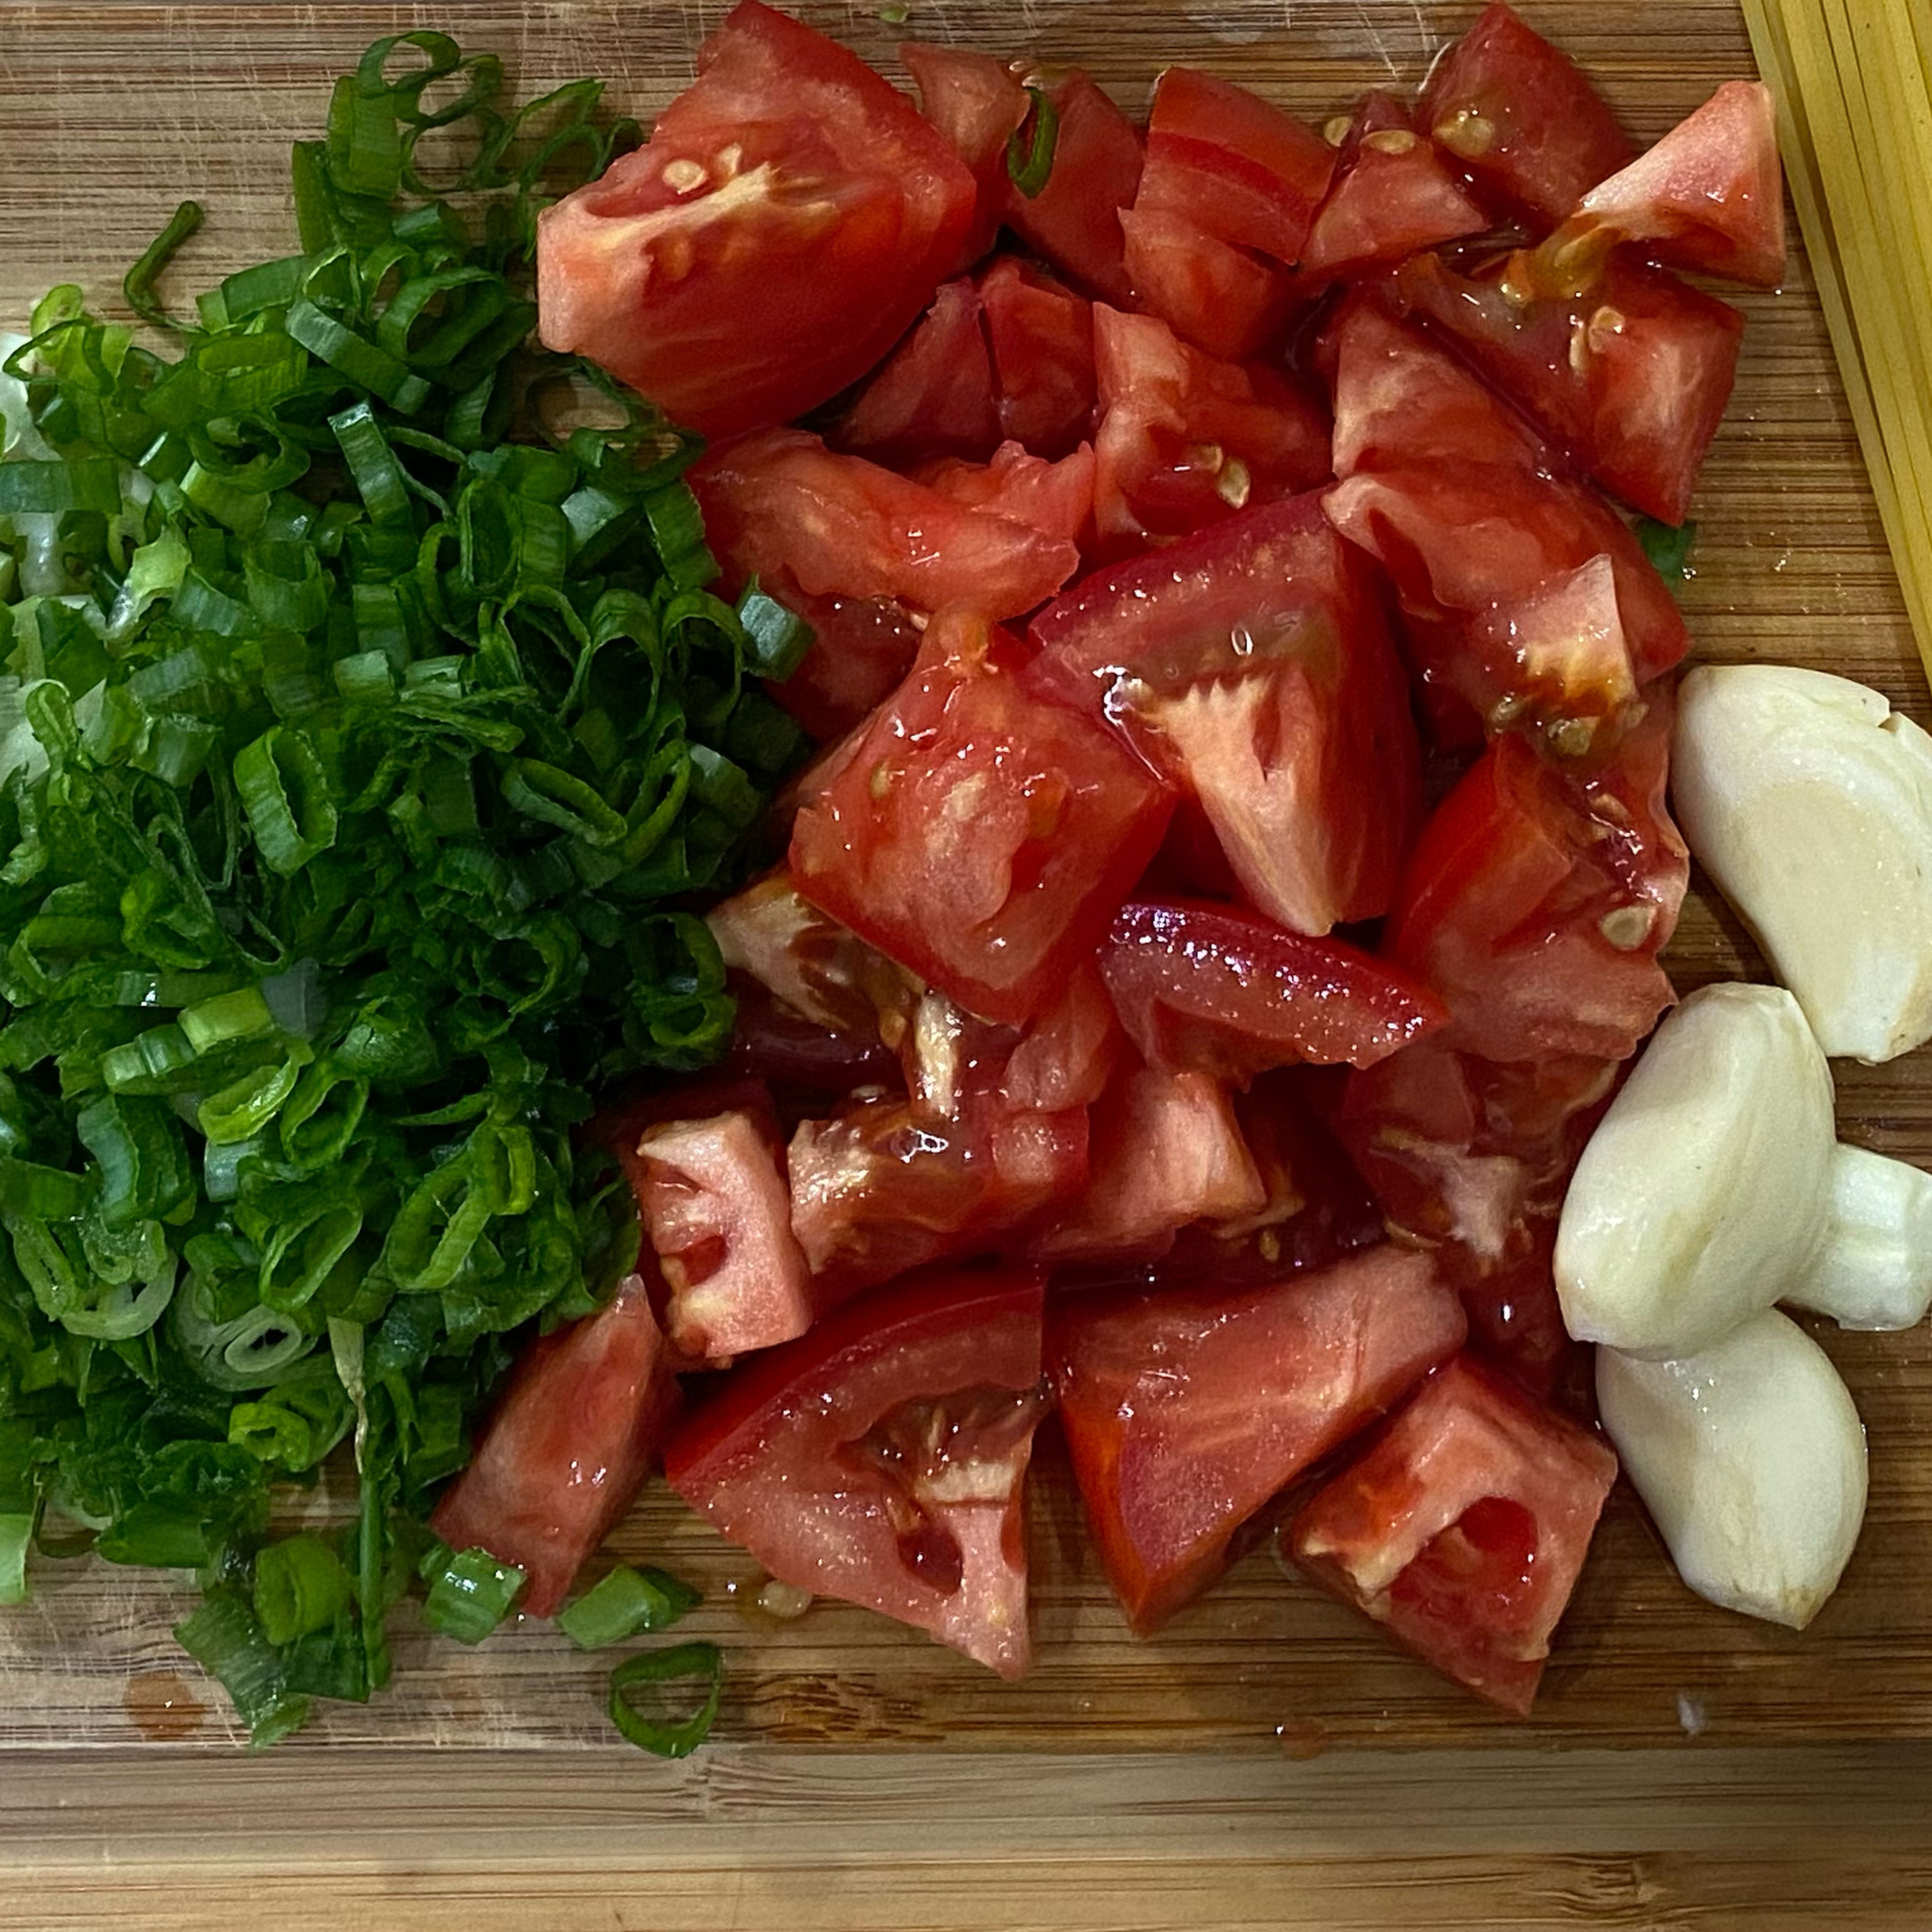 While spaghetti is boiling, chop tomatoes, slice green onions, and crush the garlic